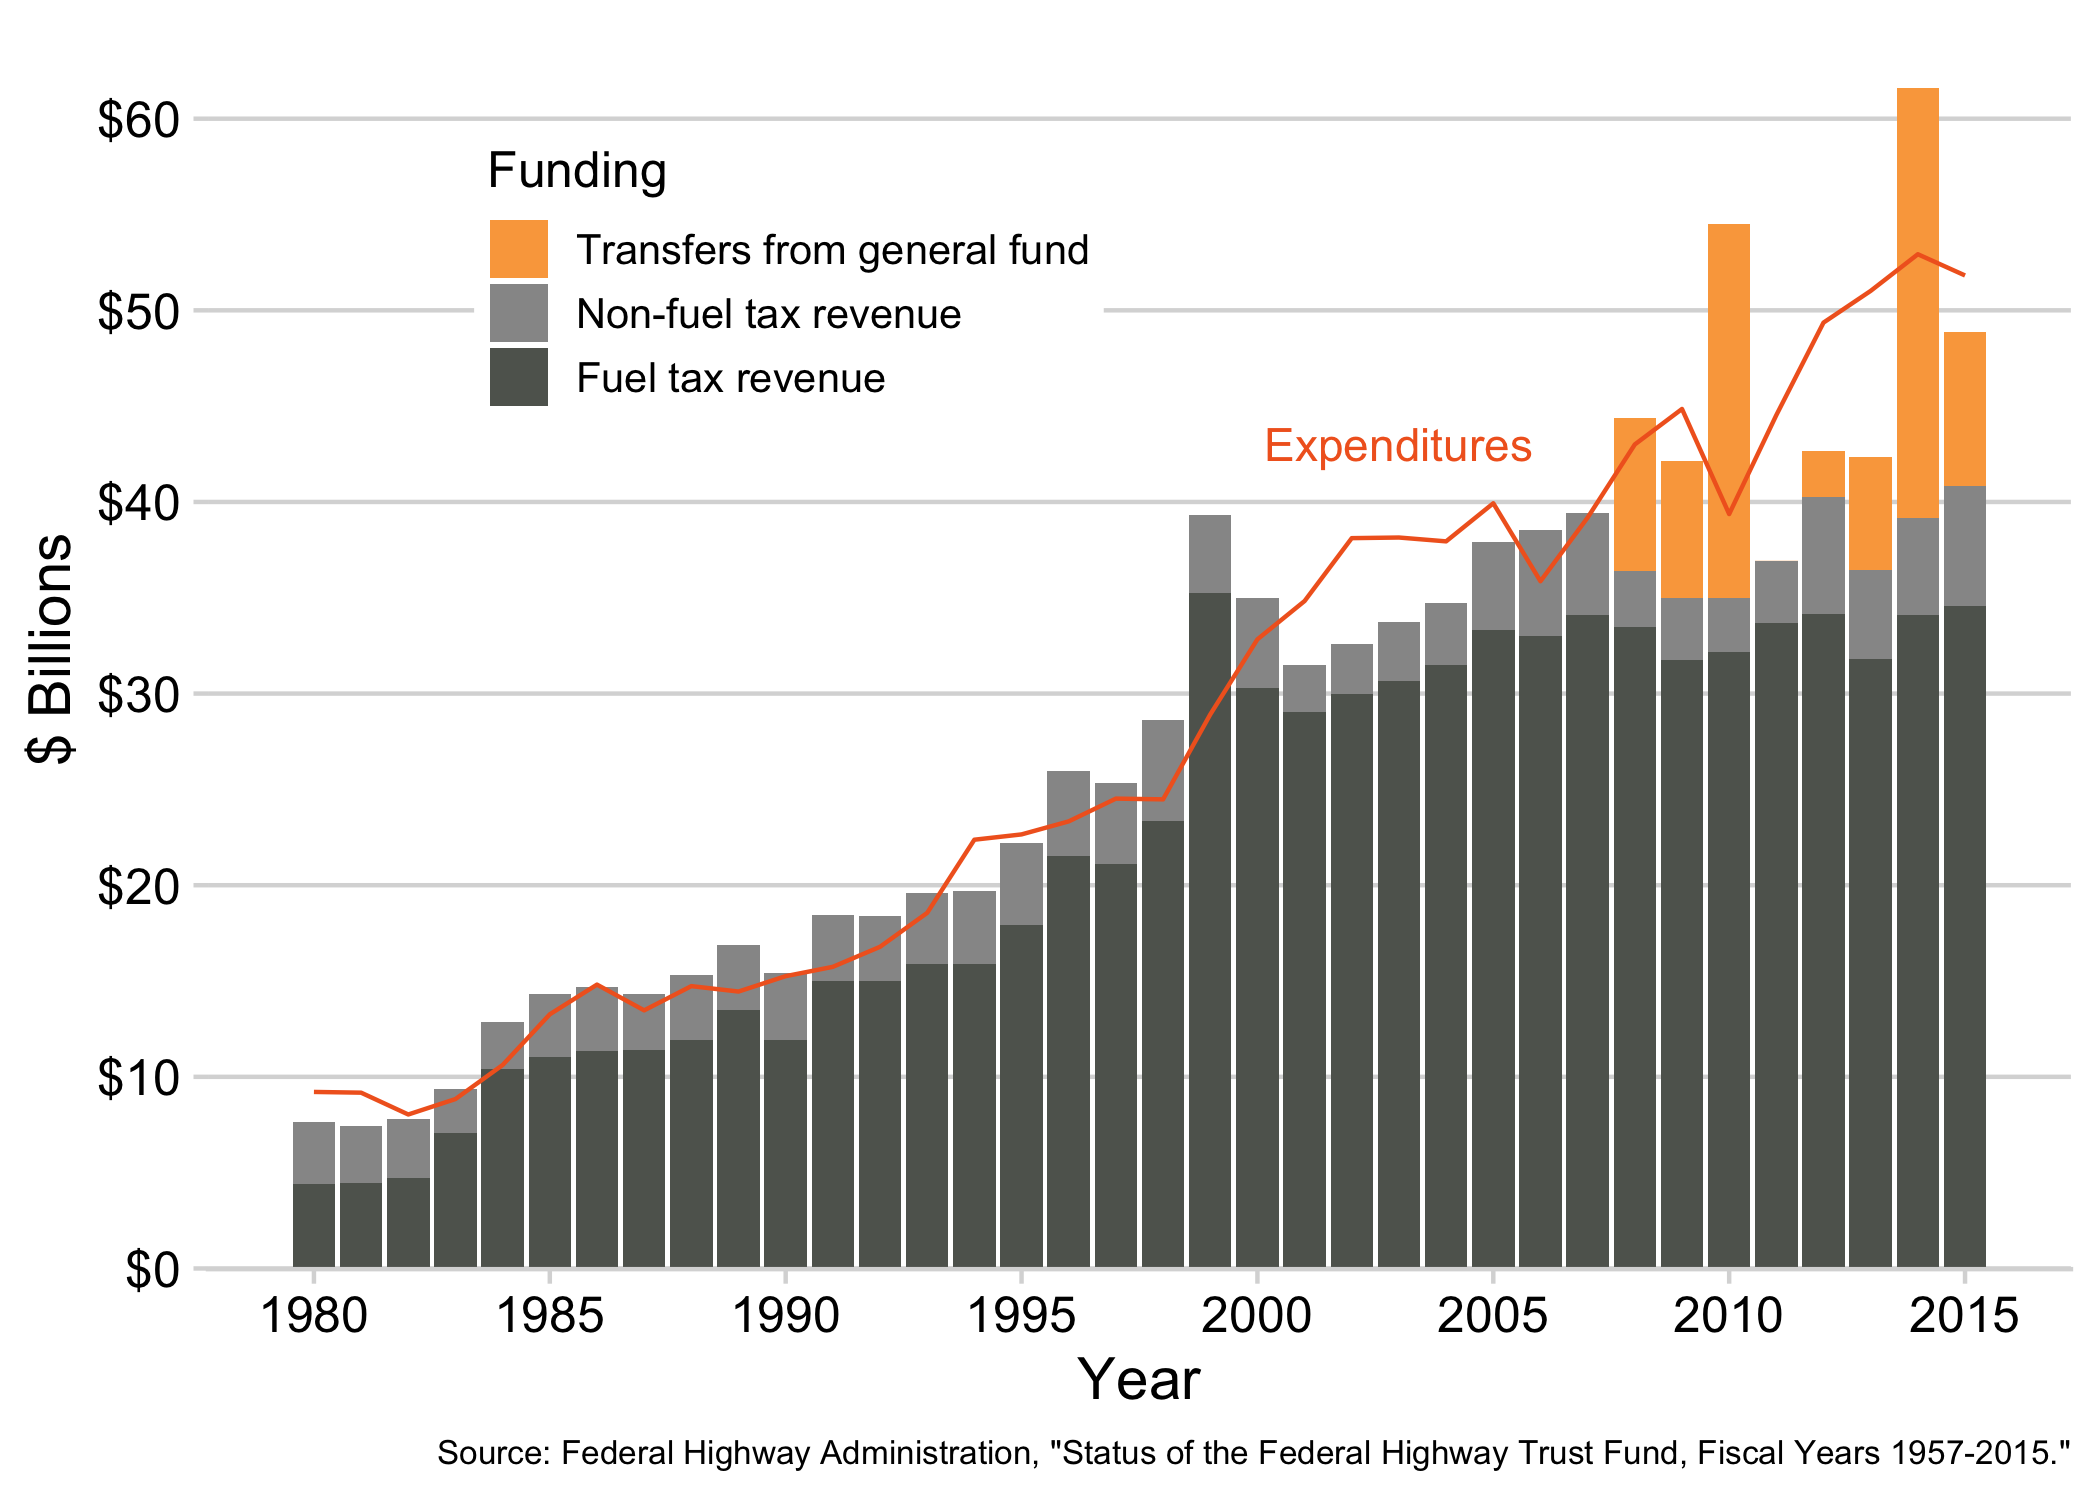 Federal highway fund revenues and expenditures in real dollars, 1980 - 2015.